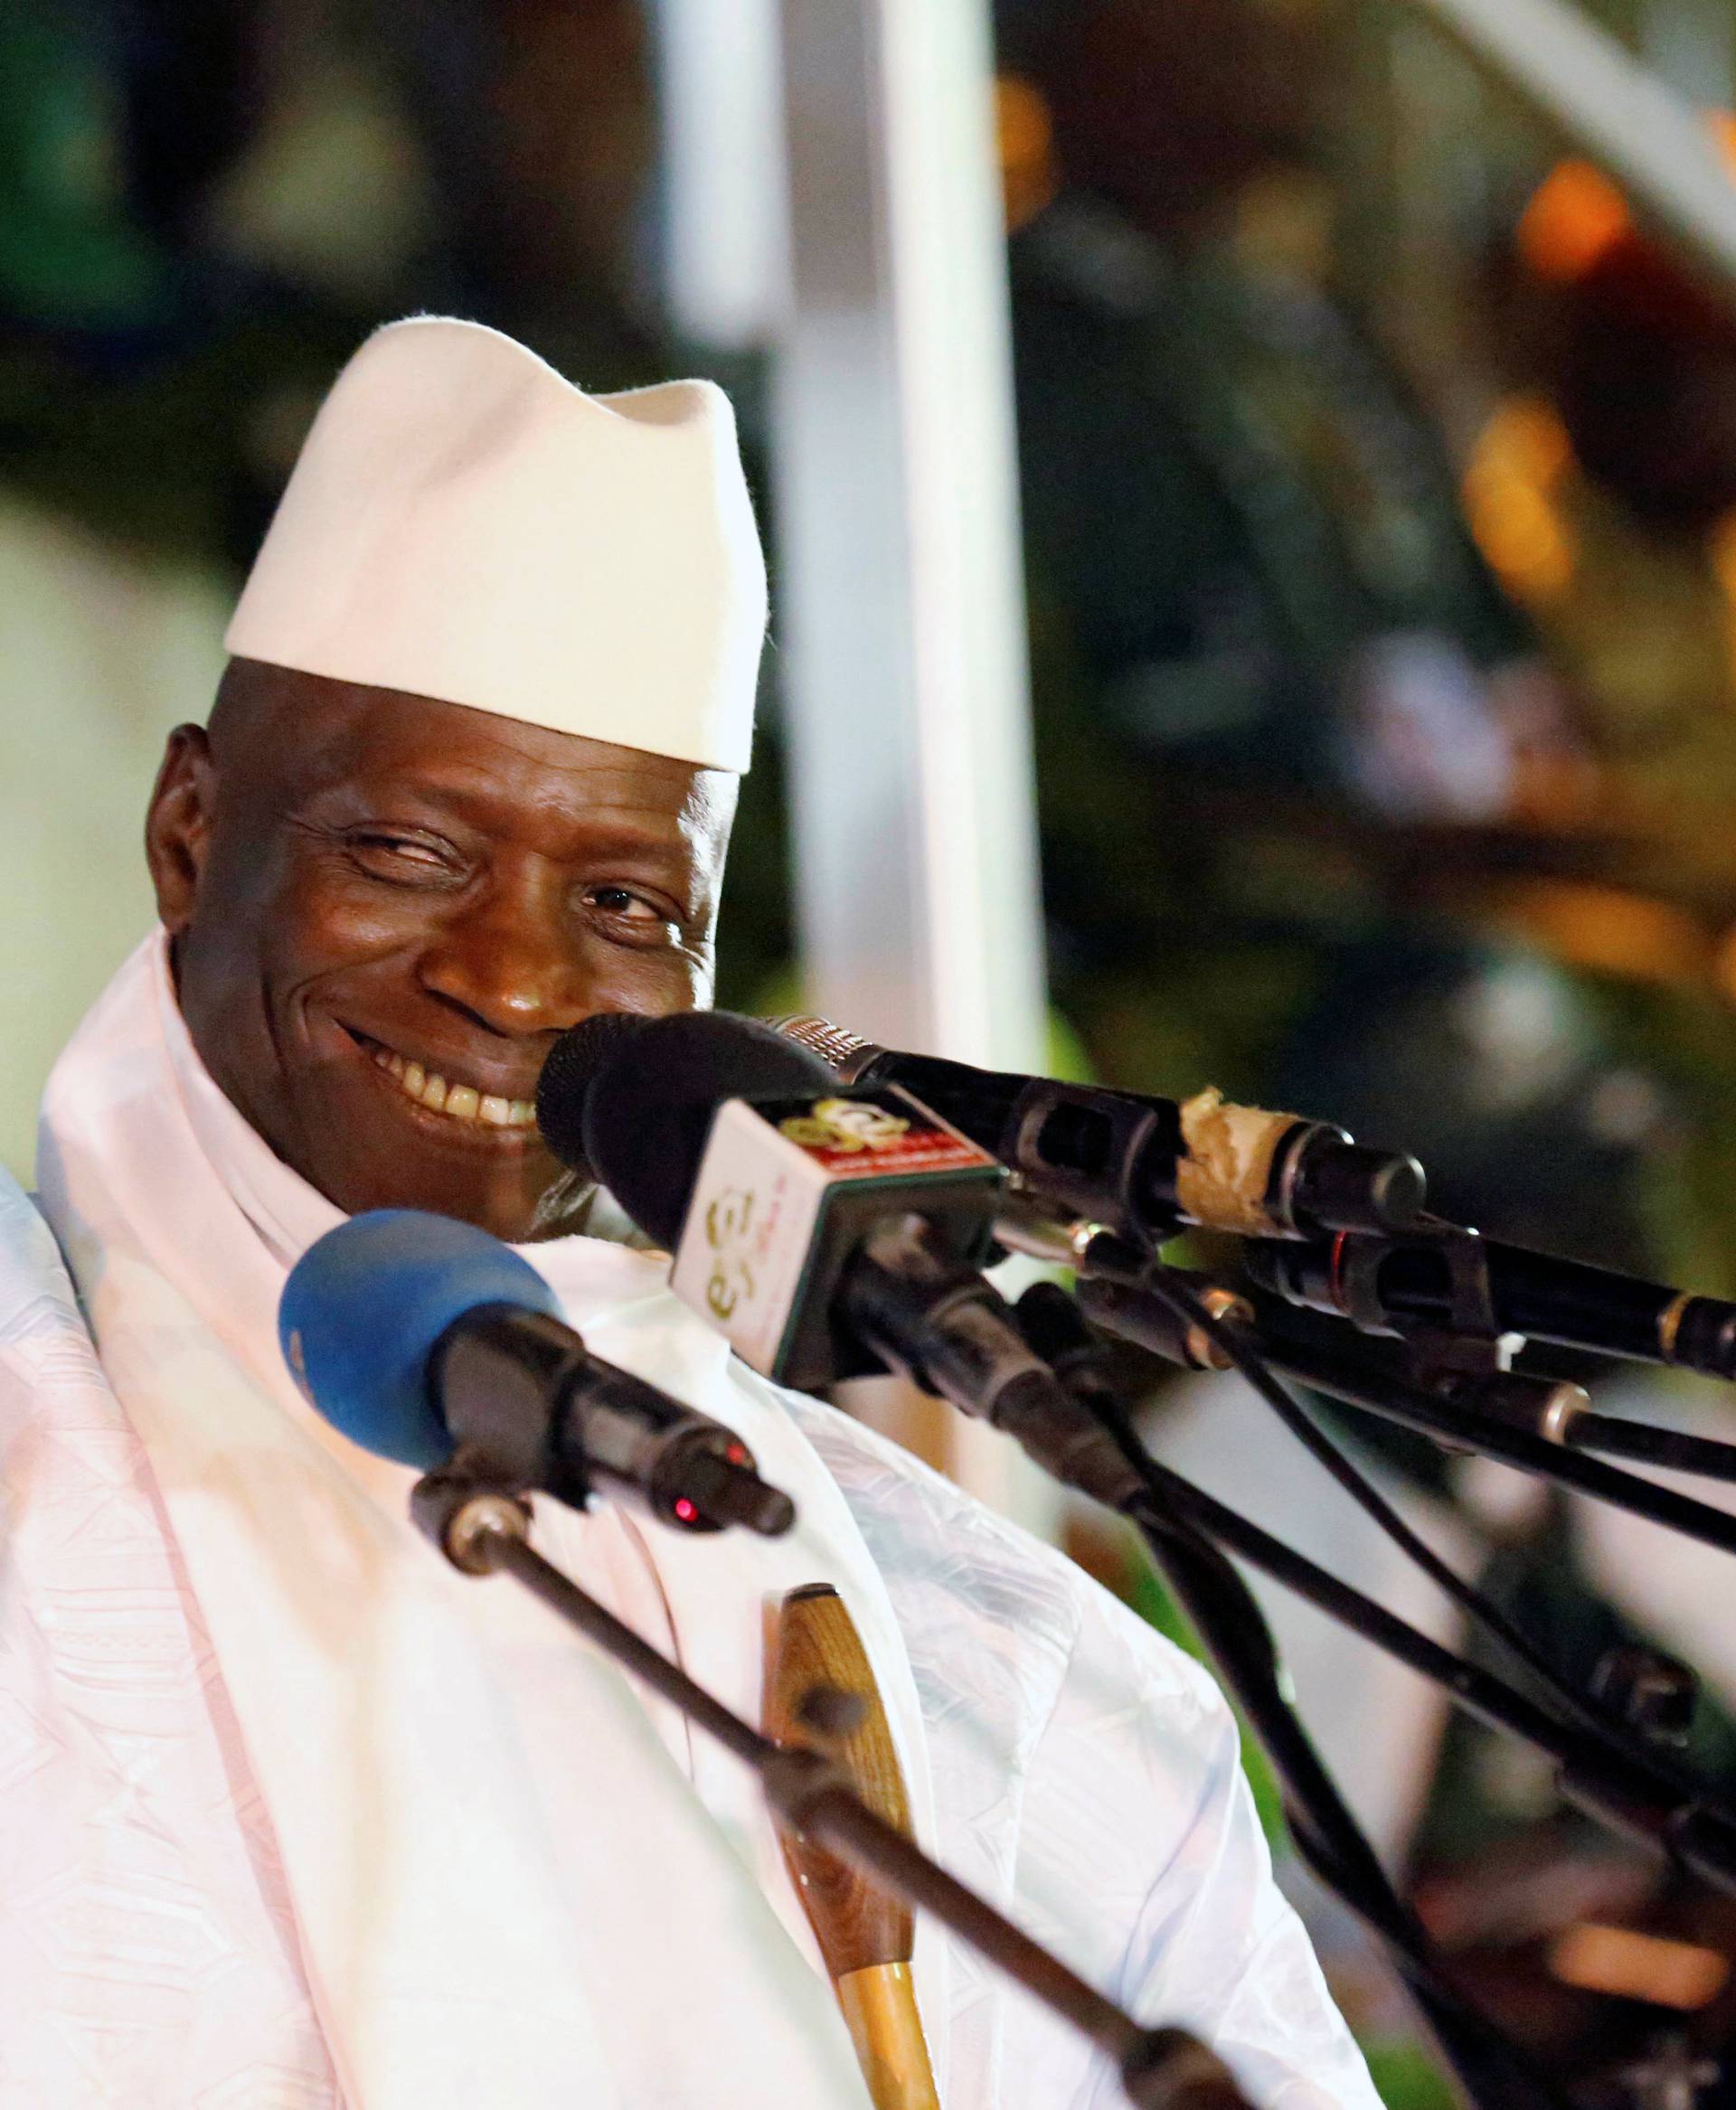 FILE PHOTO - Gambia's President Jammeh smiles during a rally in Banjul